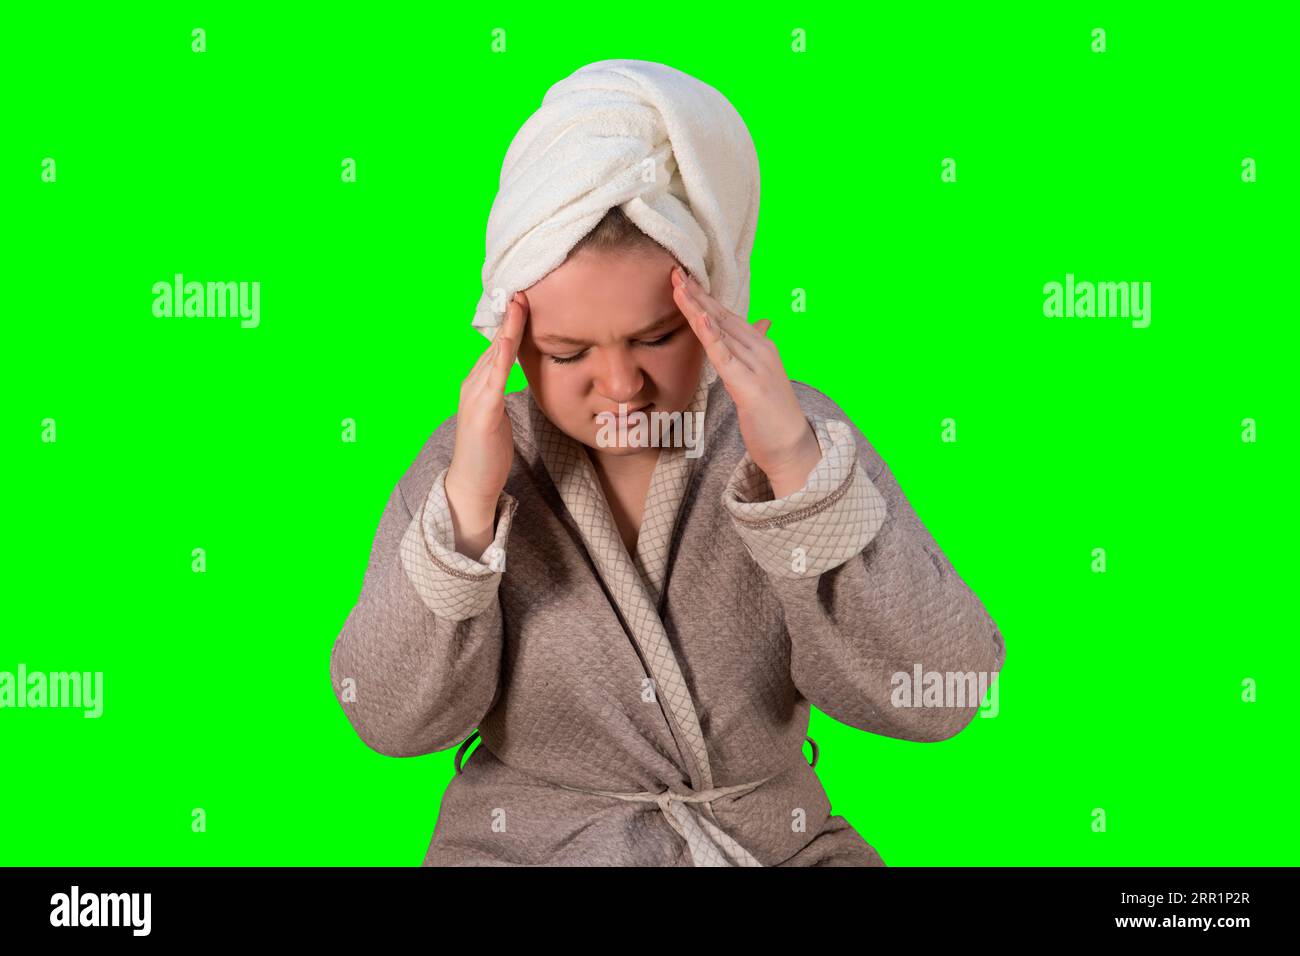 Girl in a bathrobe clasped her head in her hands on a green background (chroma key). Headache. Concept of medicine, healthcare and home treatment Stock Photo